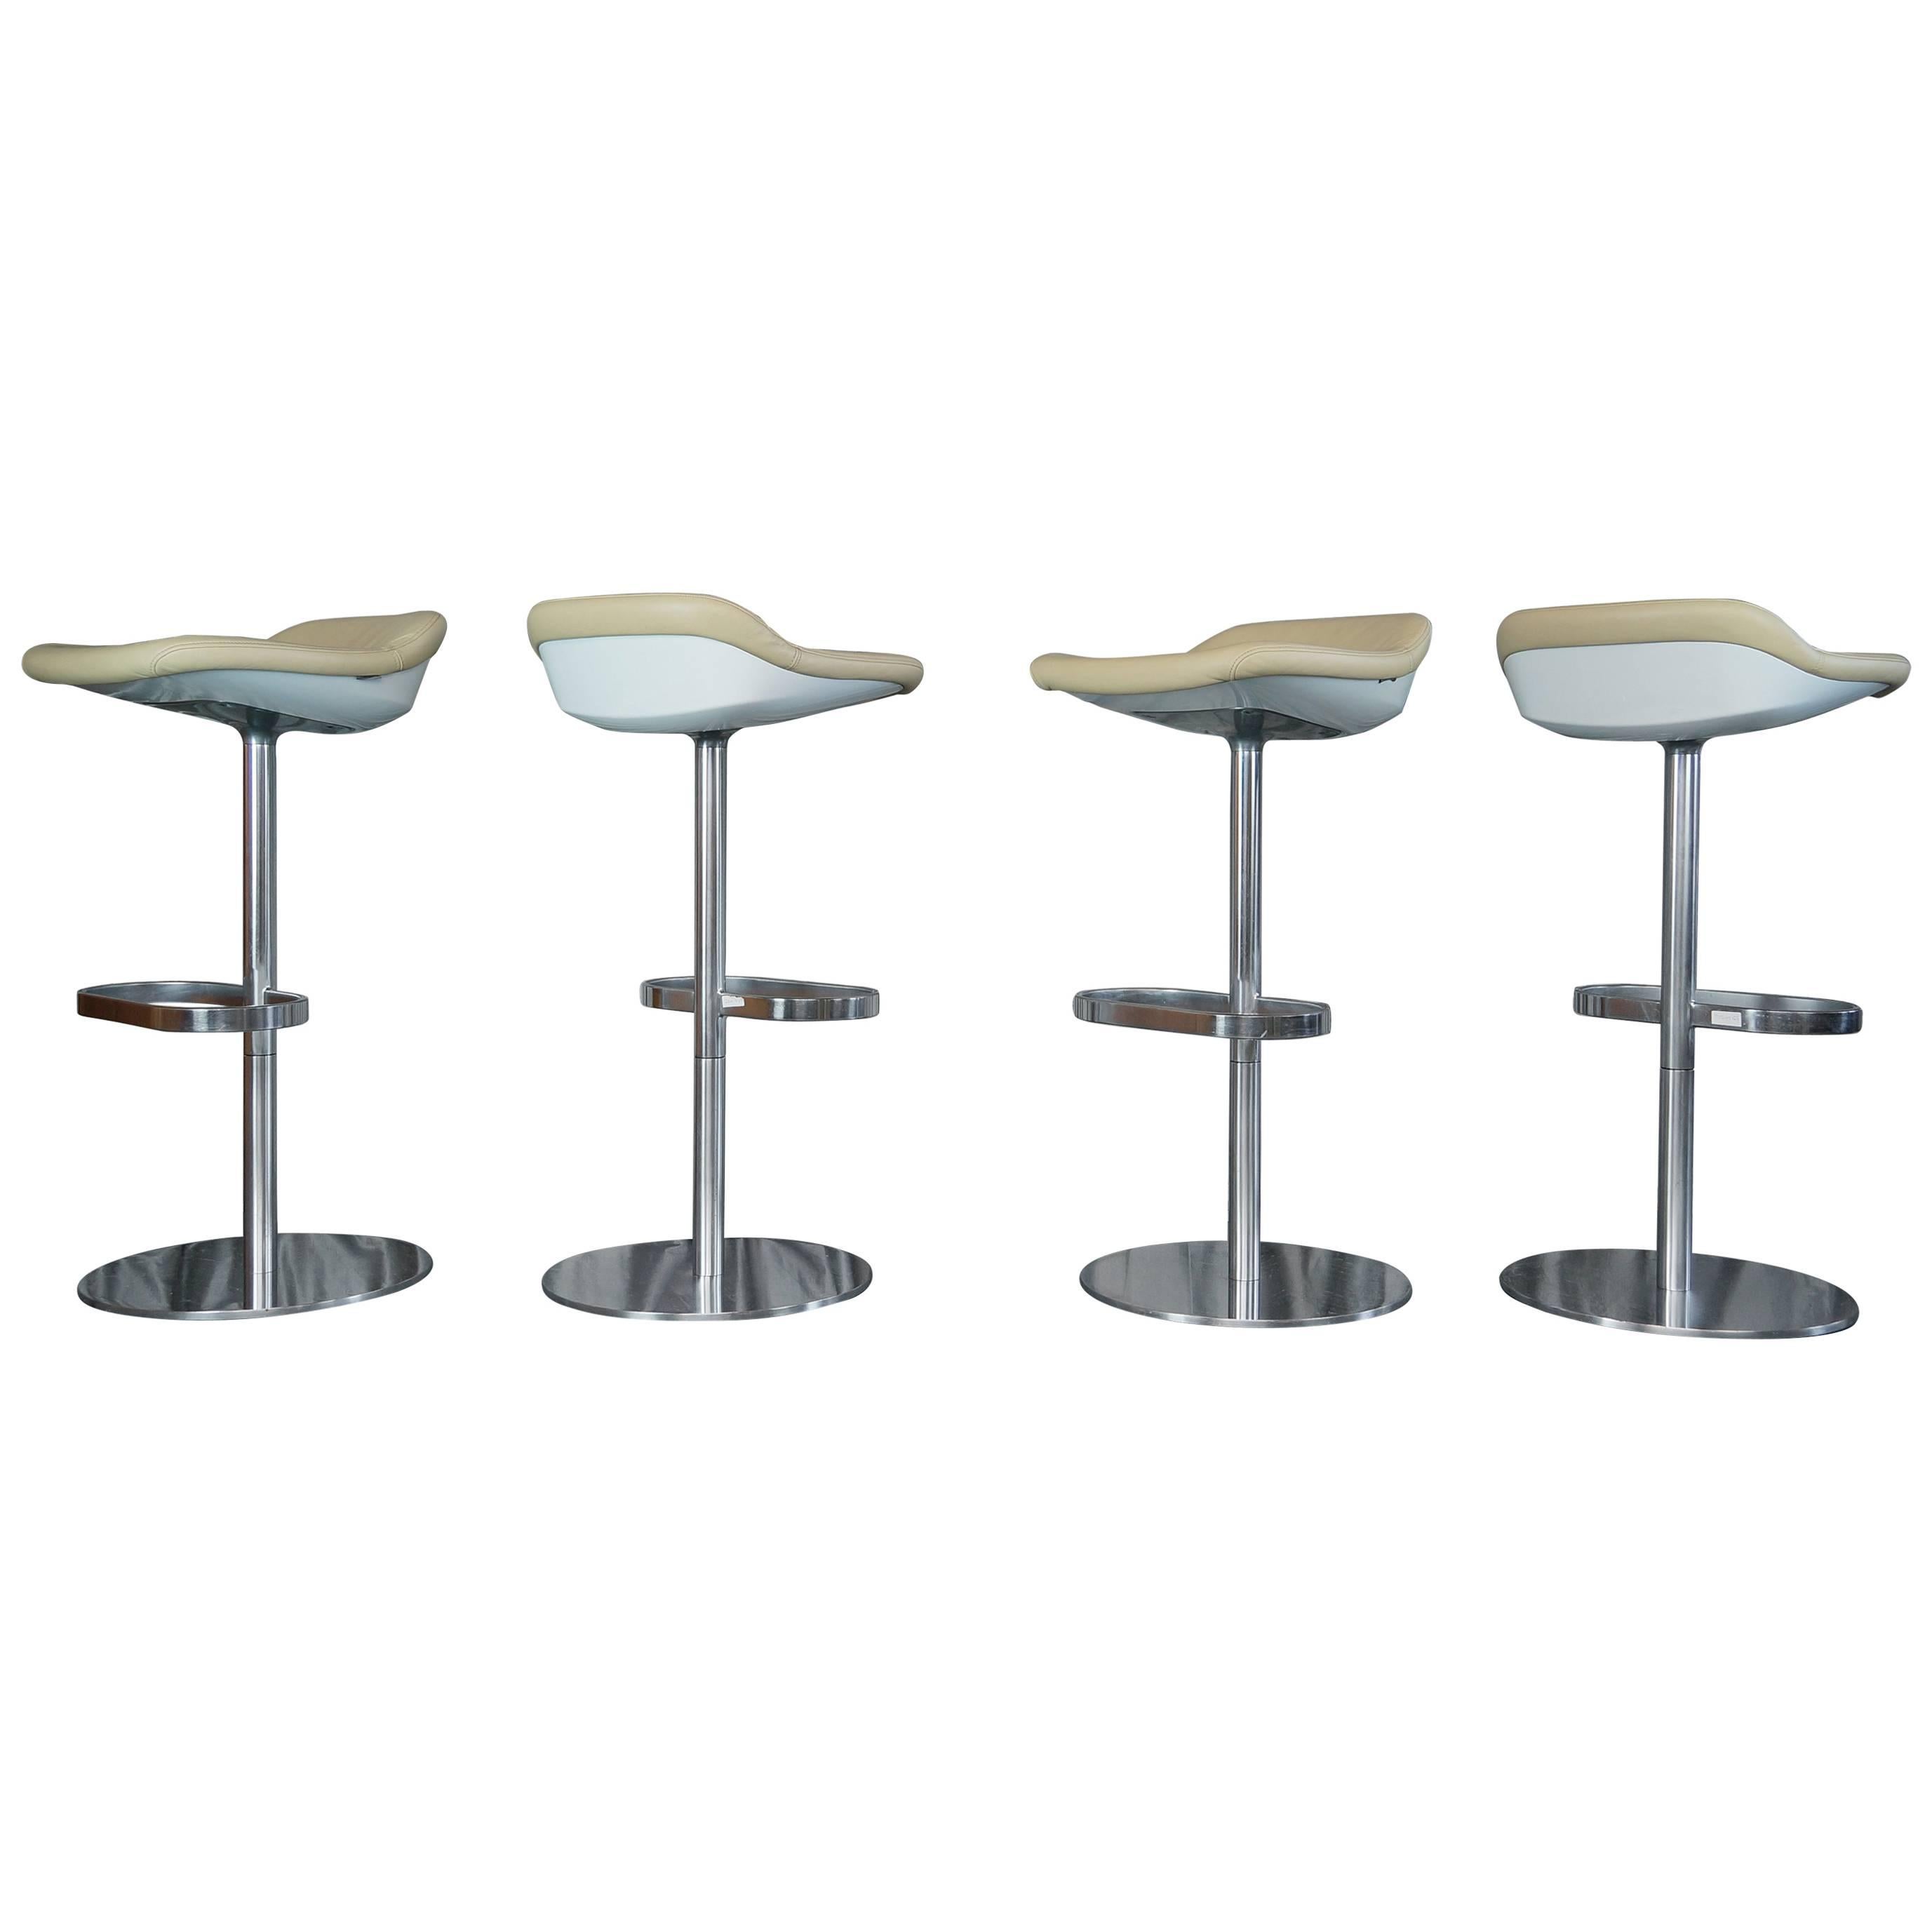 Set of Four Cream Leather Walter Knoll Turtle Bar/Counter Stools, Pearson, Lloyd For Sale